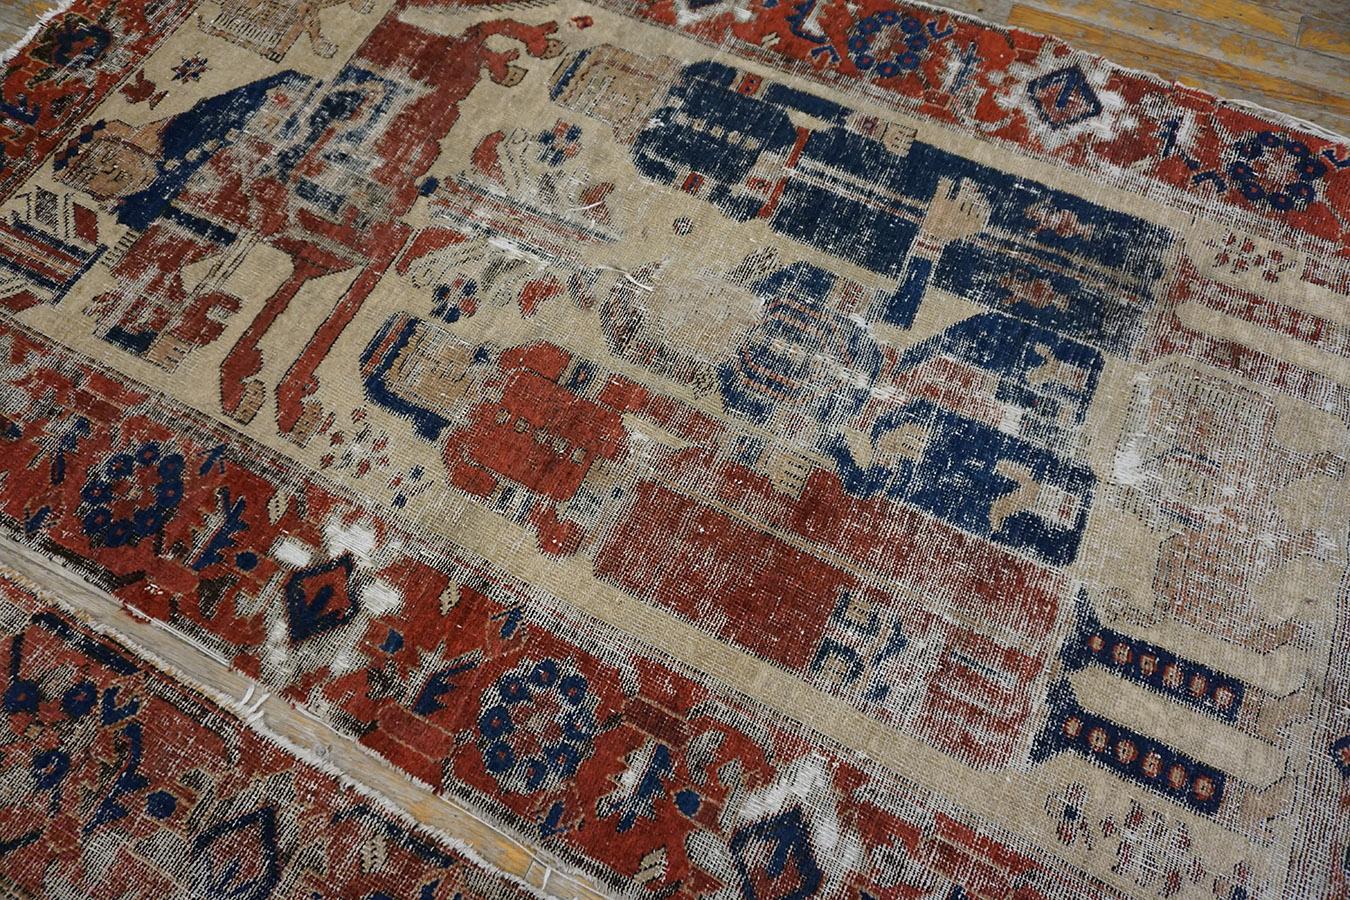 Late 19th Century Pair of Pictorial Baluch Ferdous Carpets ( 3'7